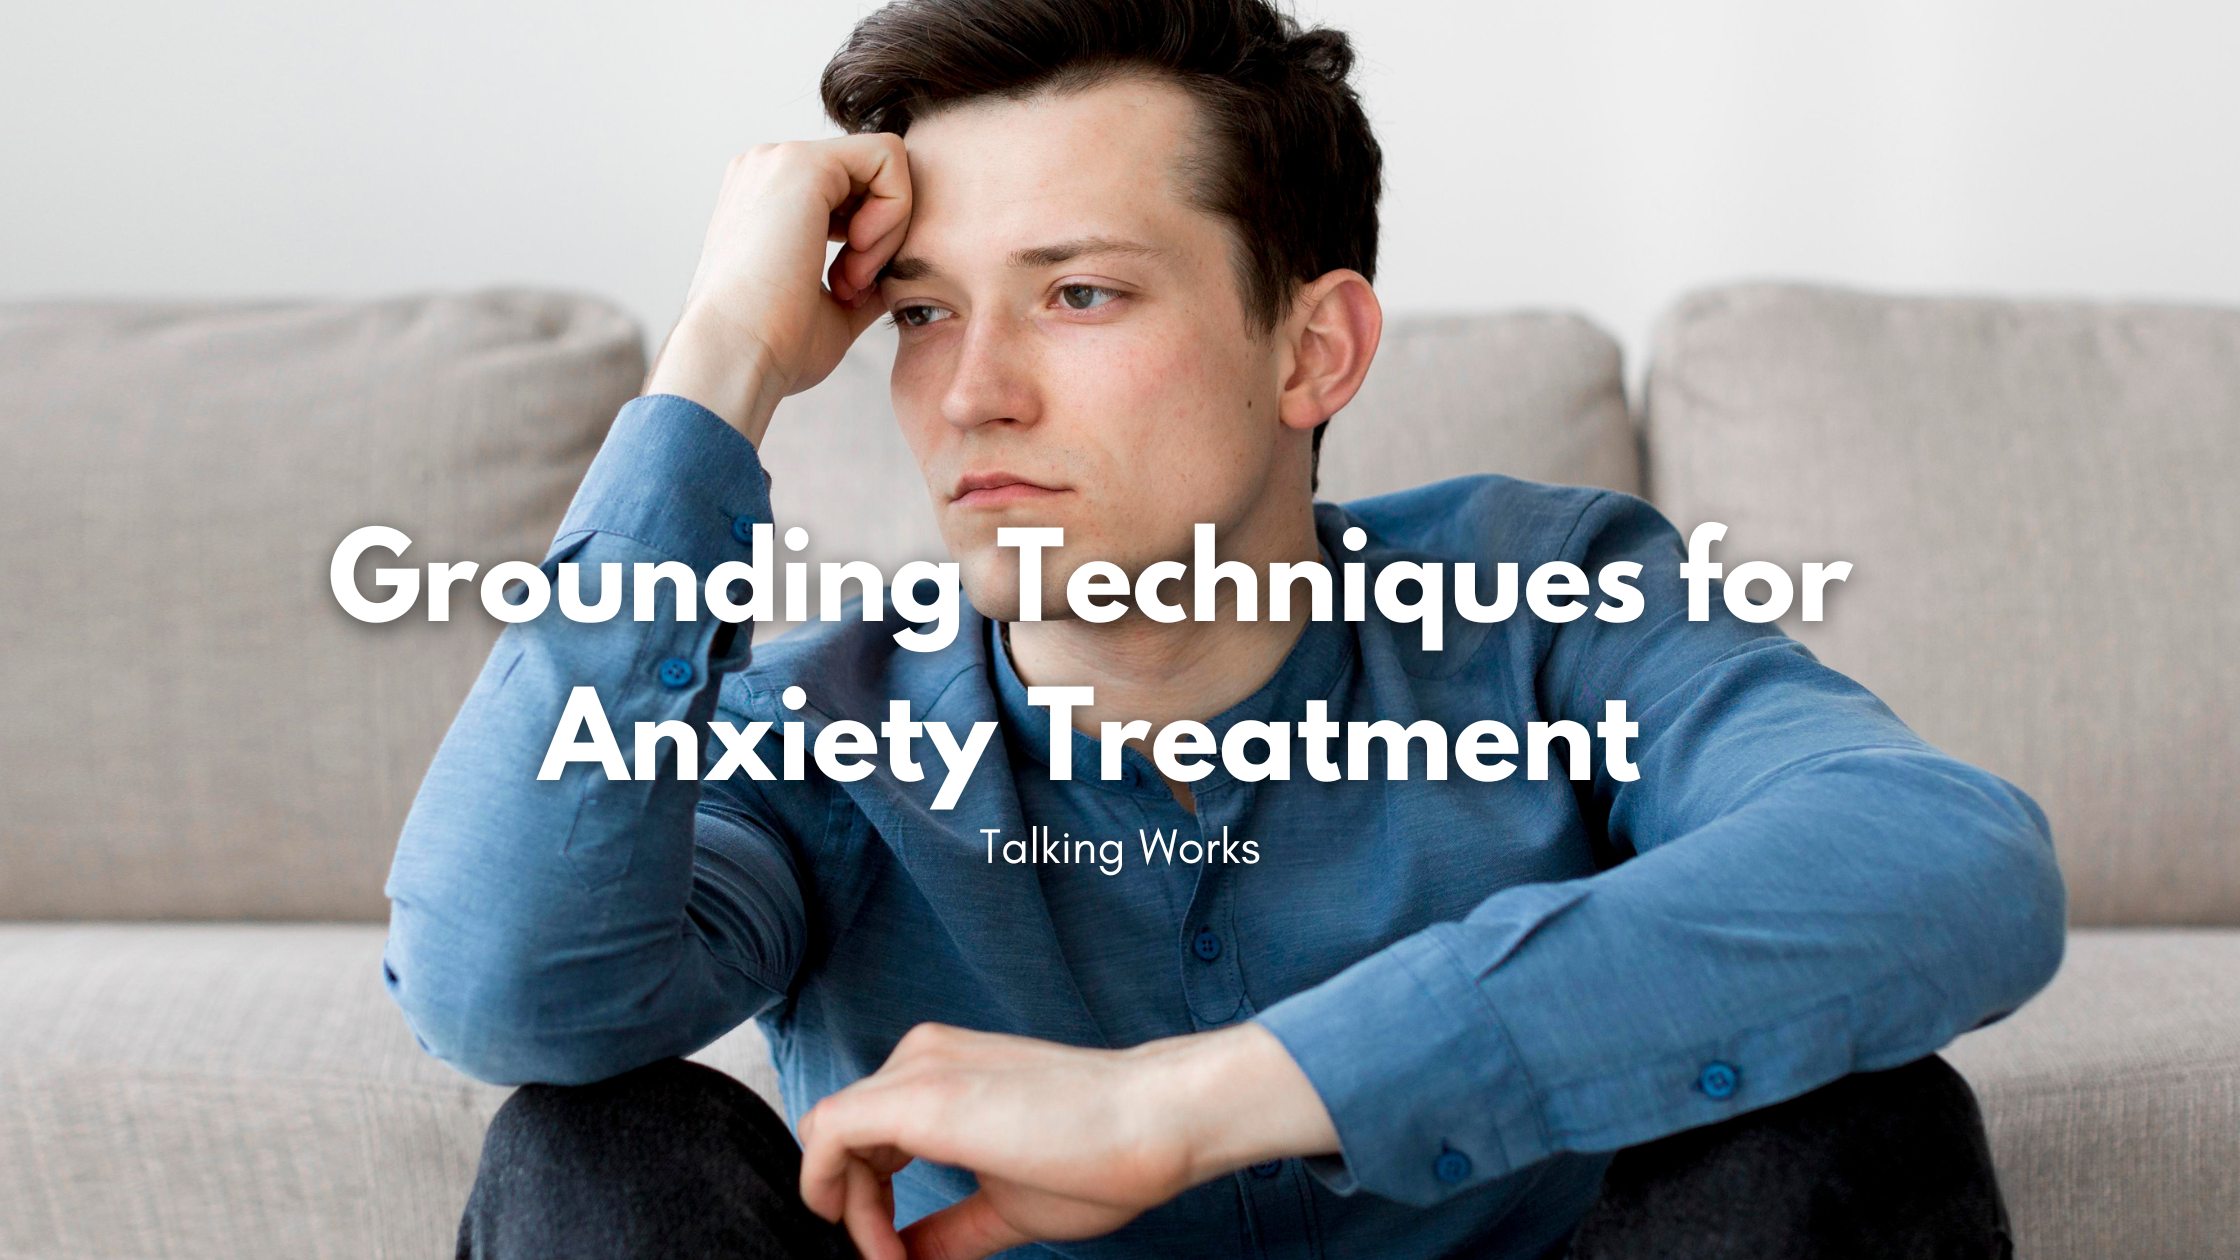 Grounding techniques for Anxiety Treatment